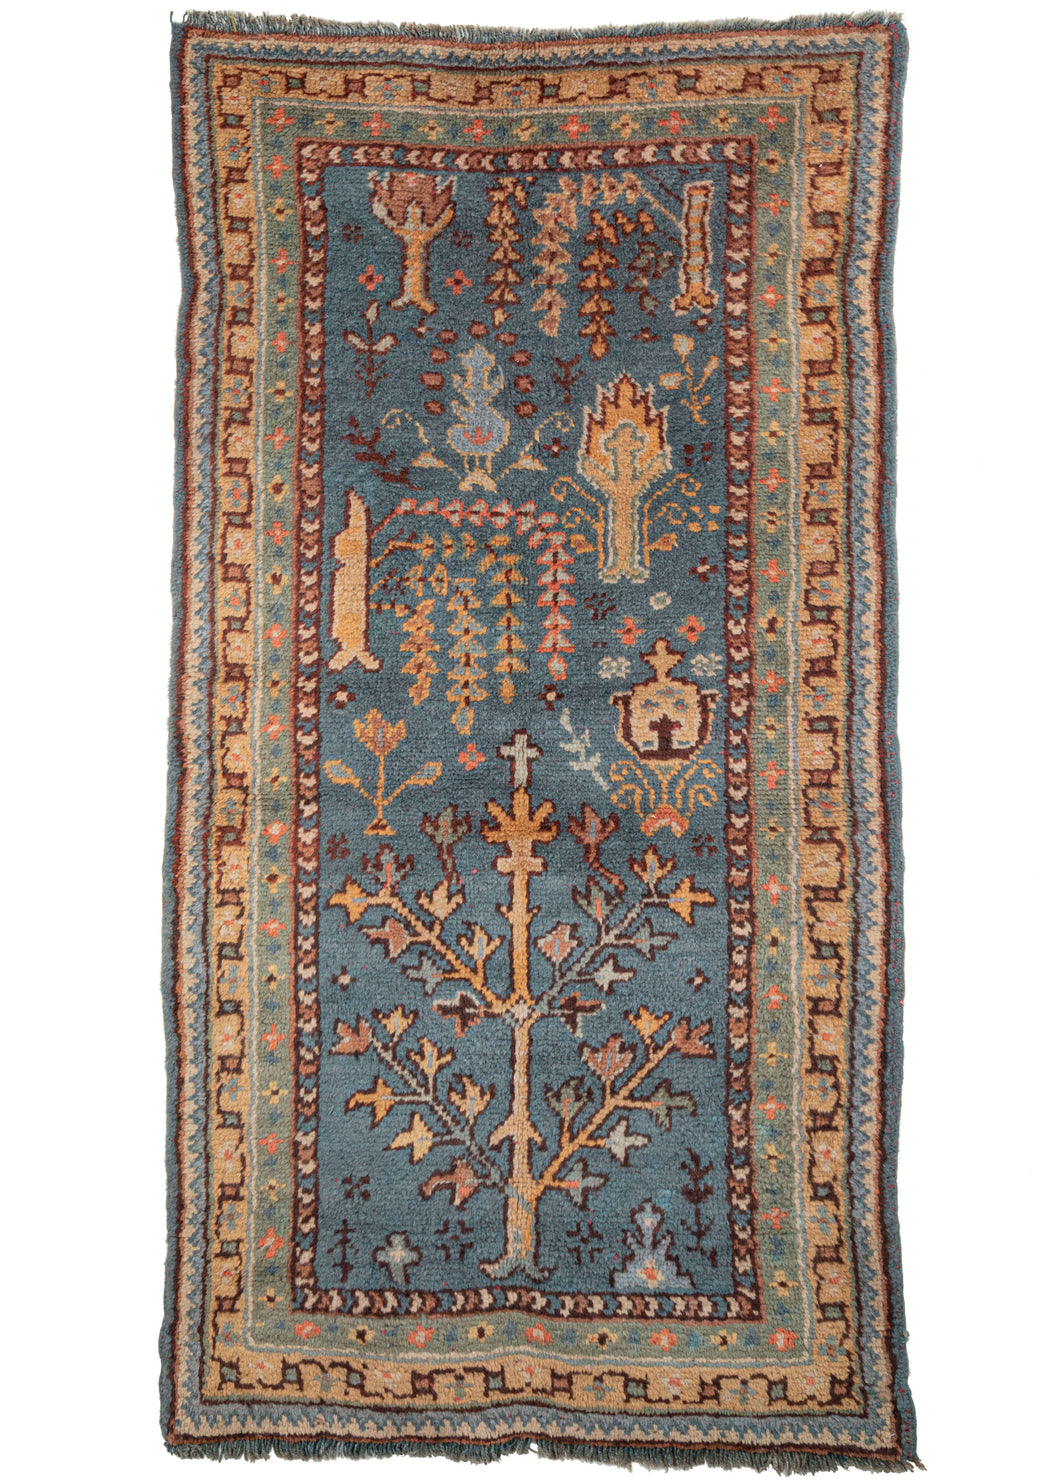 Anatolian Turkish Oushak sampler area rug featuring a variation of a Bid Majnun or weeping willow design. It is rendered asymmetrically and with the composite motifs at different scales. The pleasing palette includes soft yellow, green, coral, and brown, and wonderful blue-green ground. 